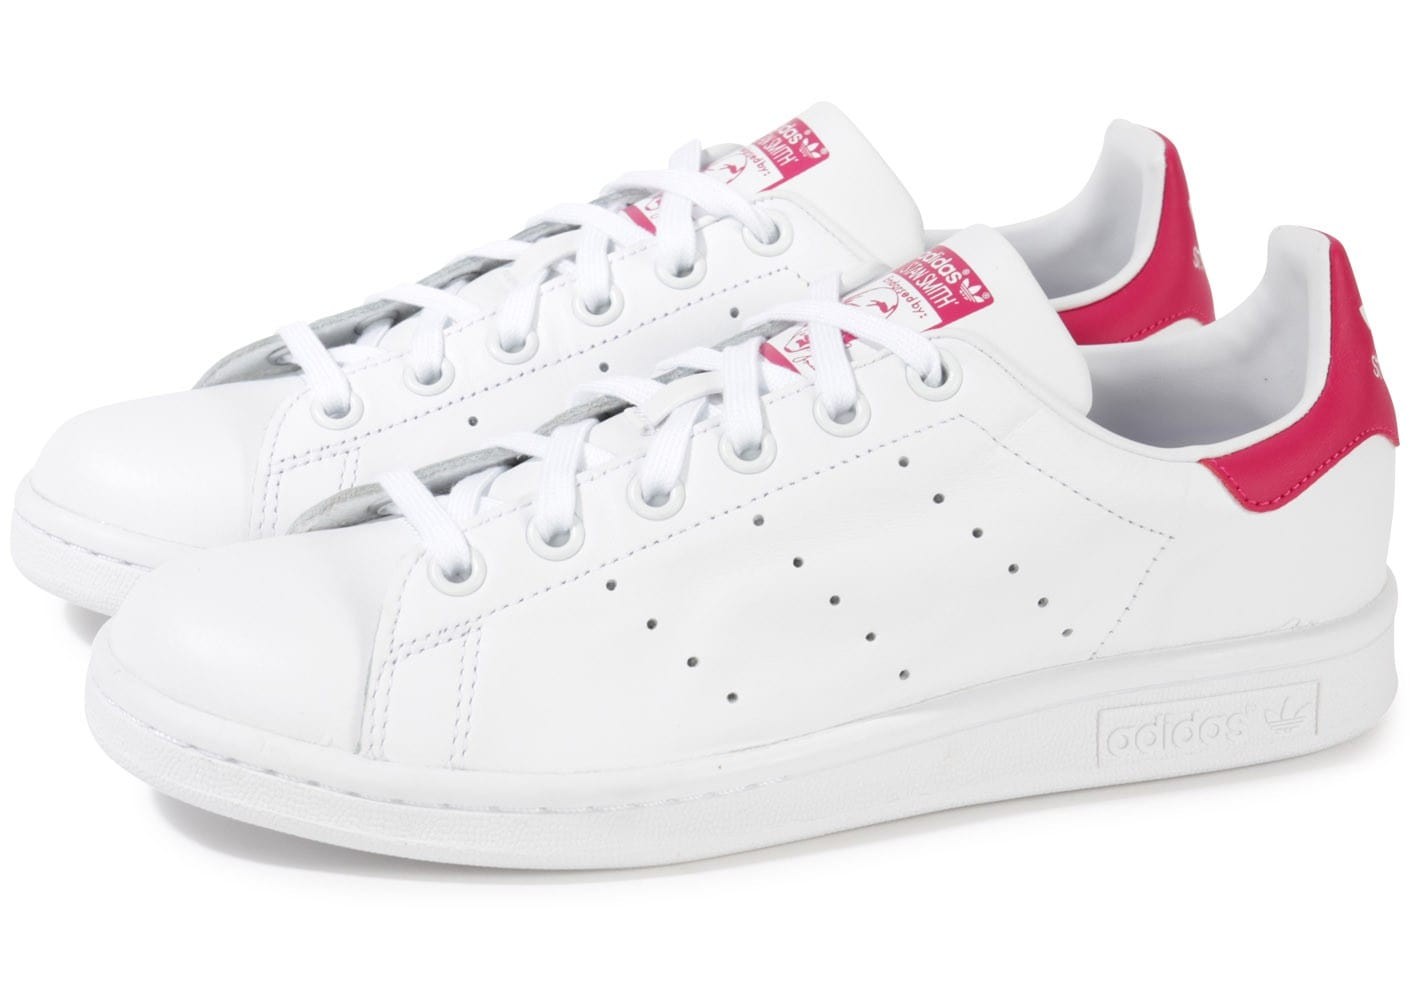 adidas stan smith scratch soldes How To Fix Scratches On Stan Smiths